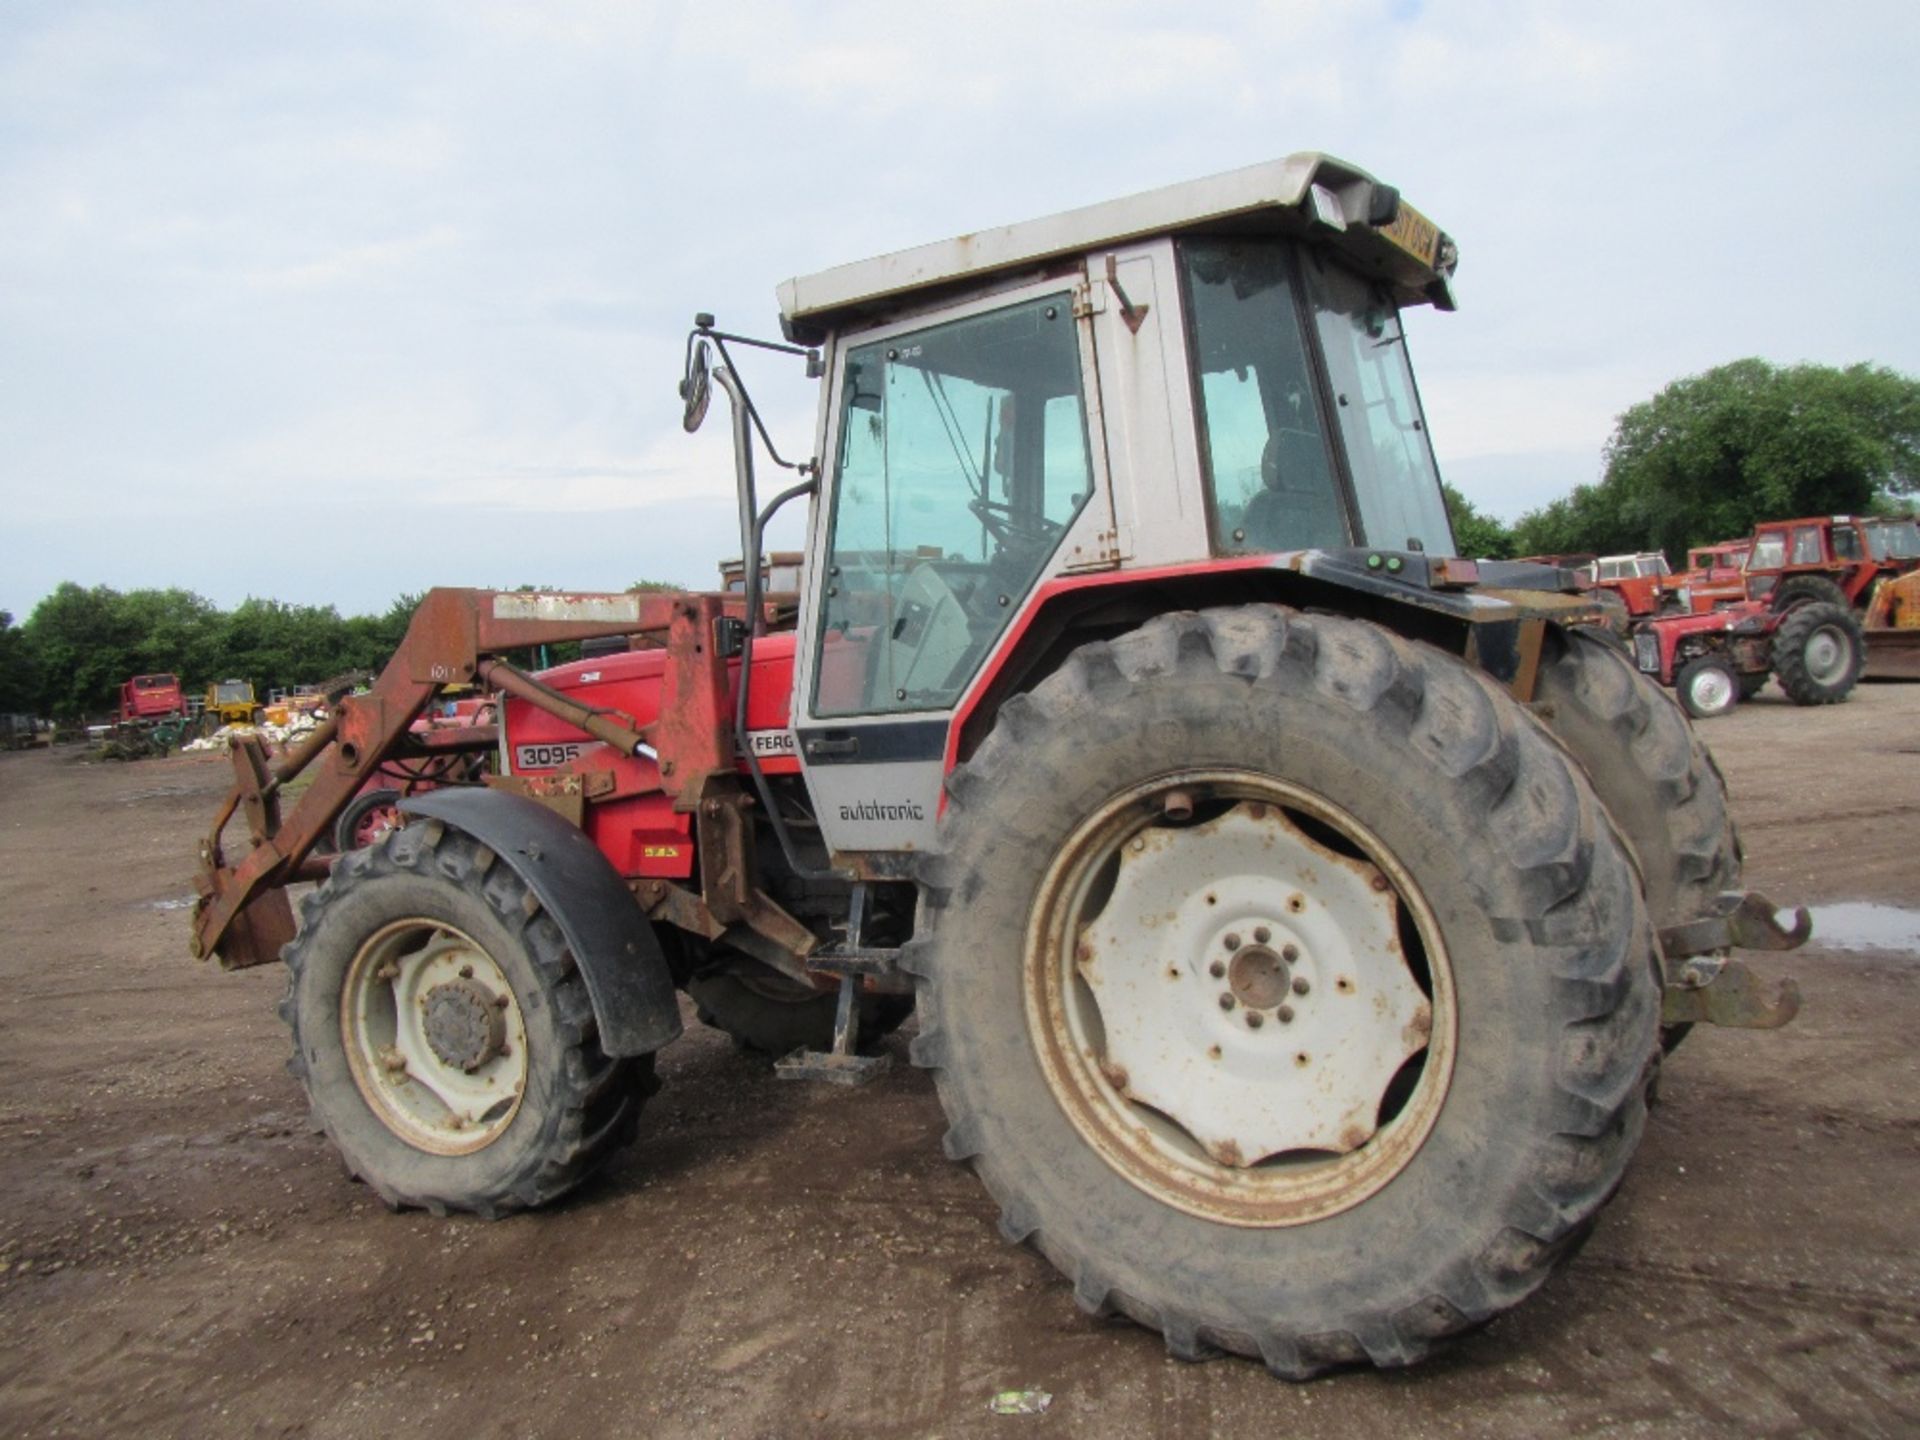 1994 Massey Ferguson 3090 4wd Tractor with Front Loader. Reg. No. M317 OCW Ser No C201010 - Image 10 of 18